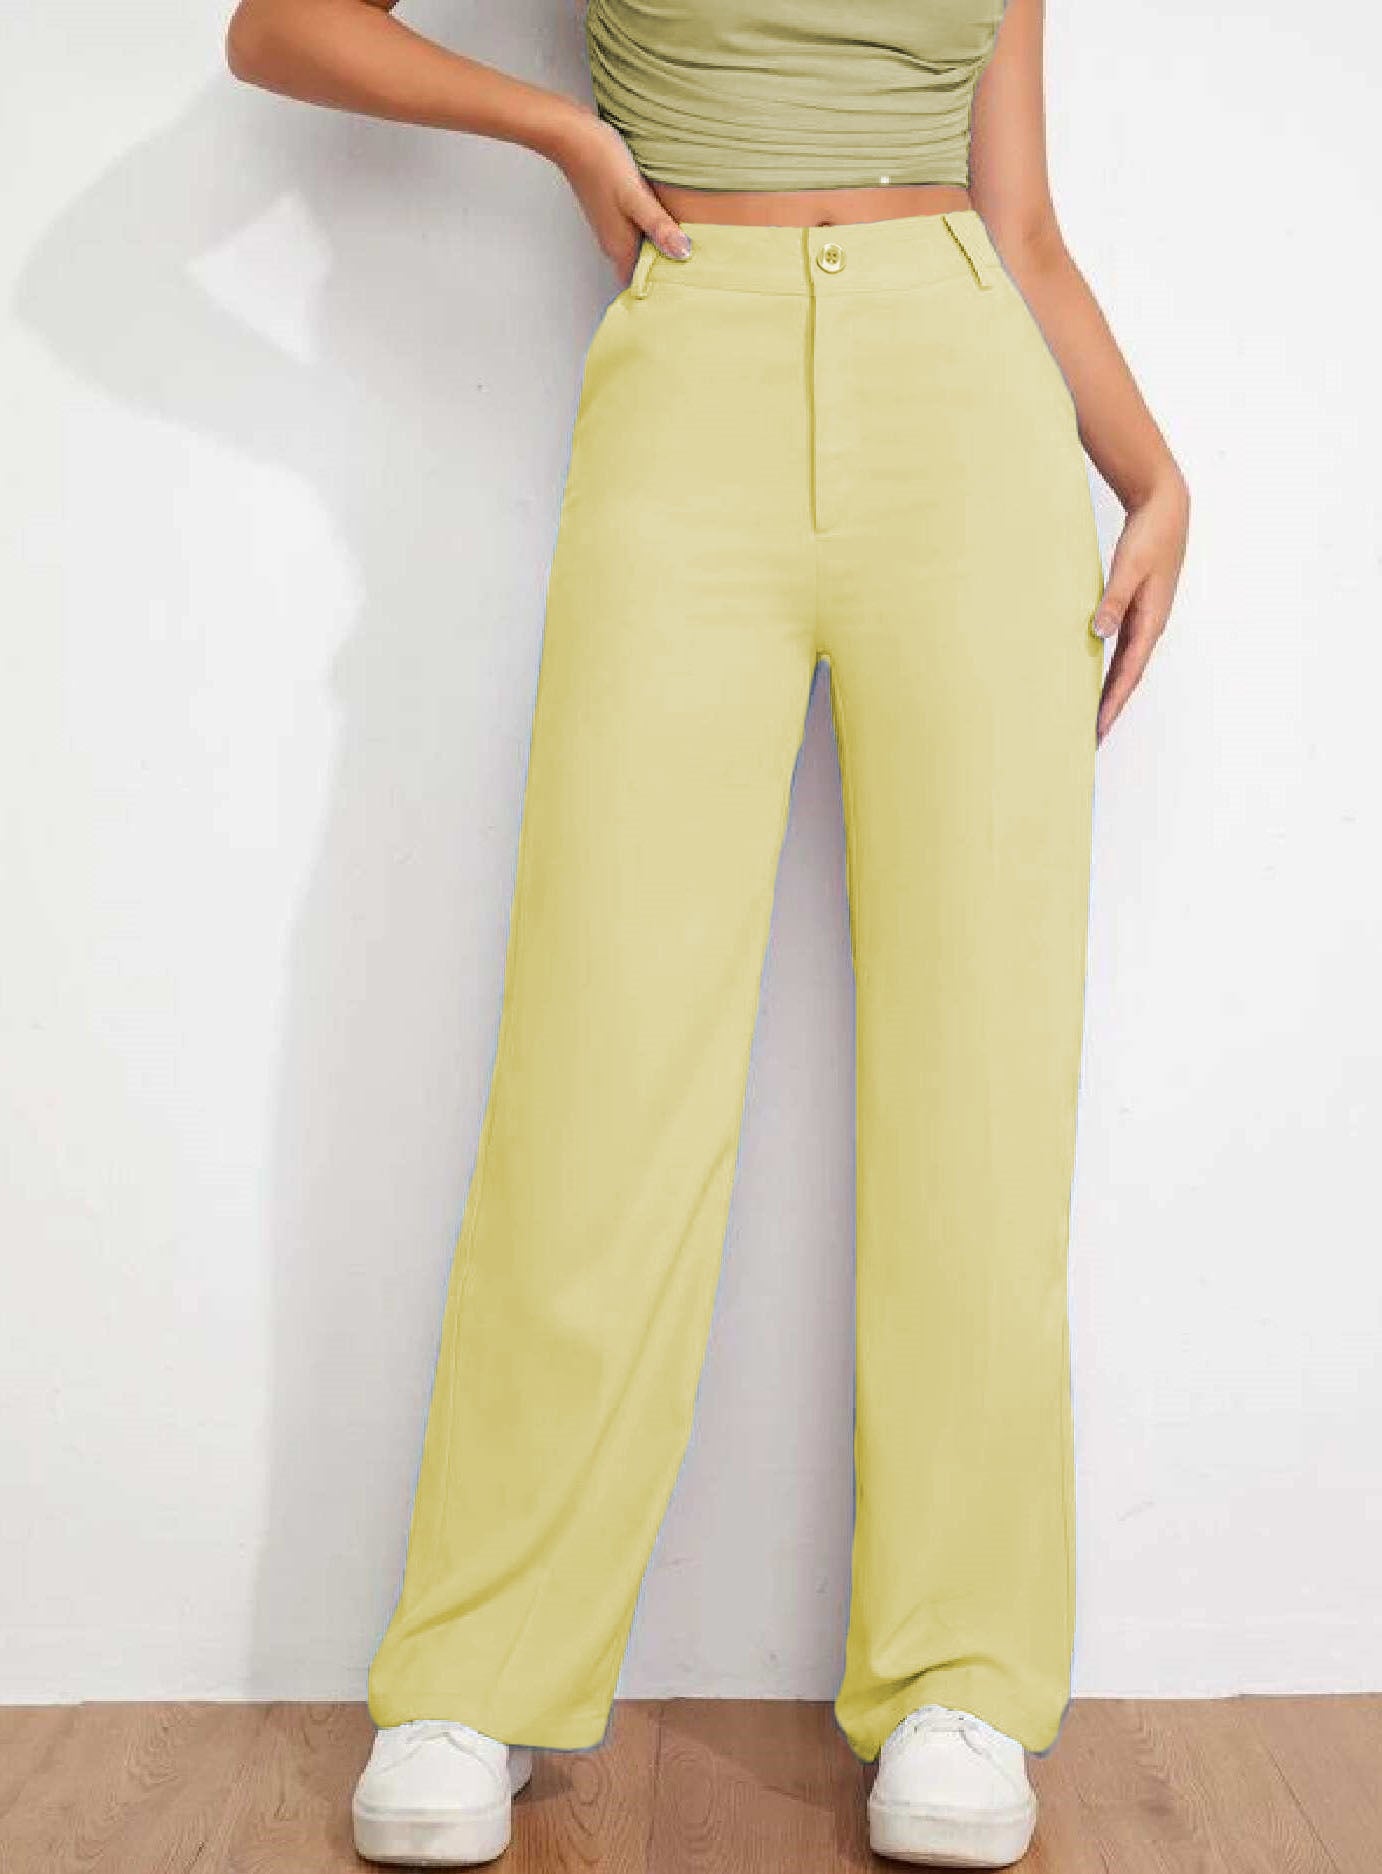 Buy High Waist Pants Online in India at Best Rates | Myntra